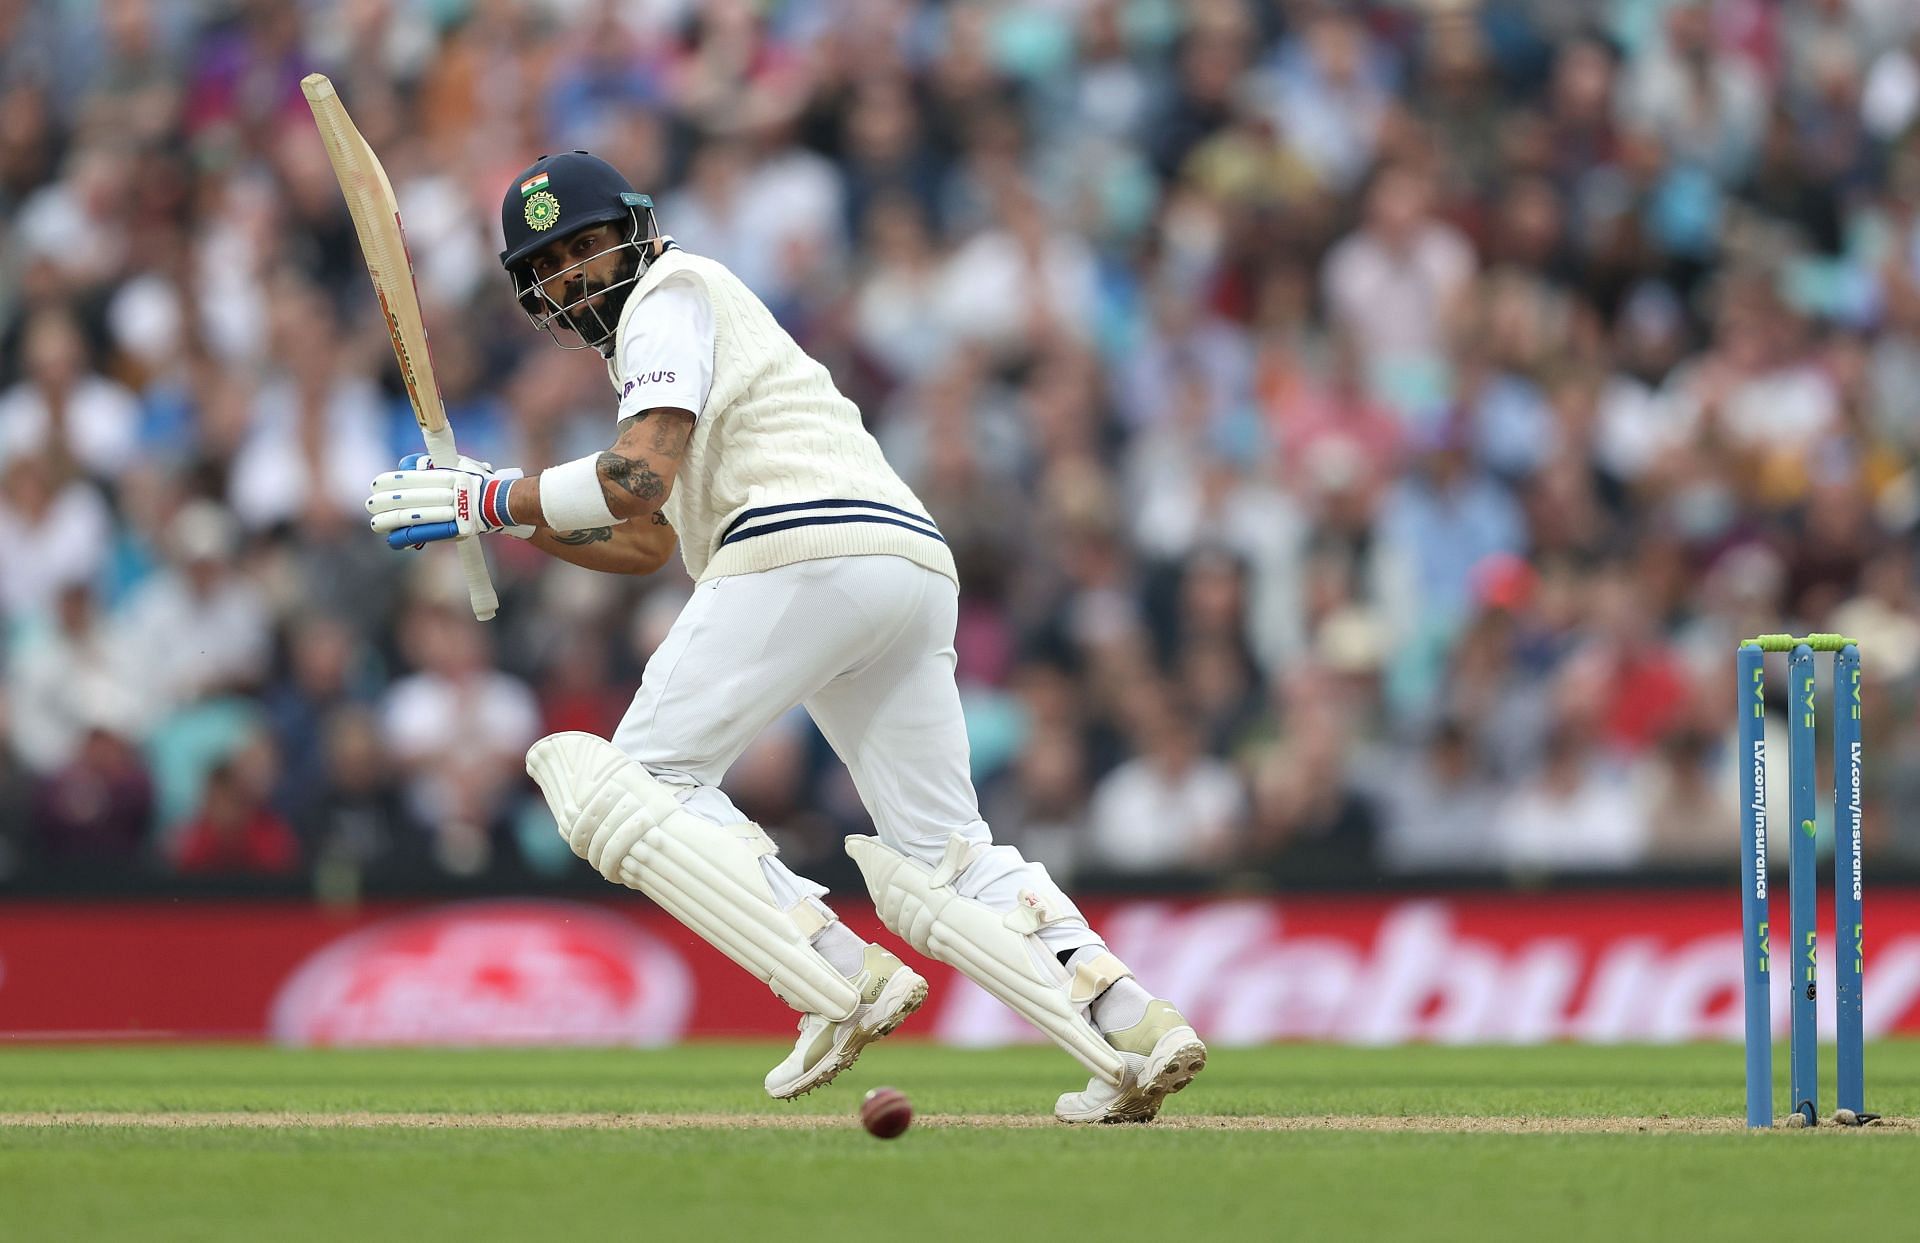 Virat Kohli averaged 31.14 in the first four Tests of the series